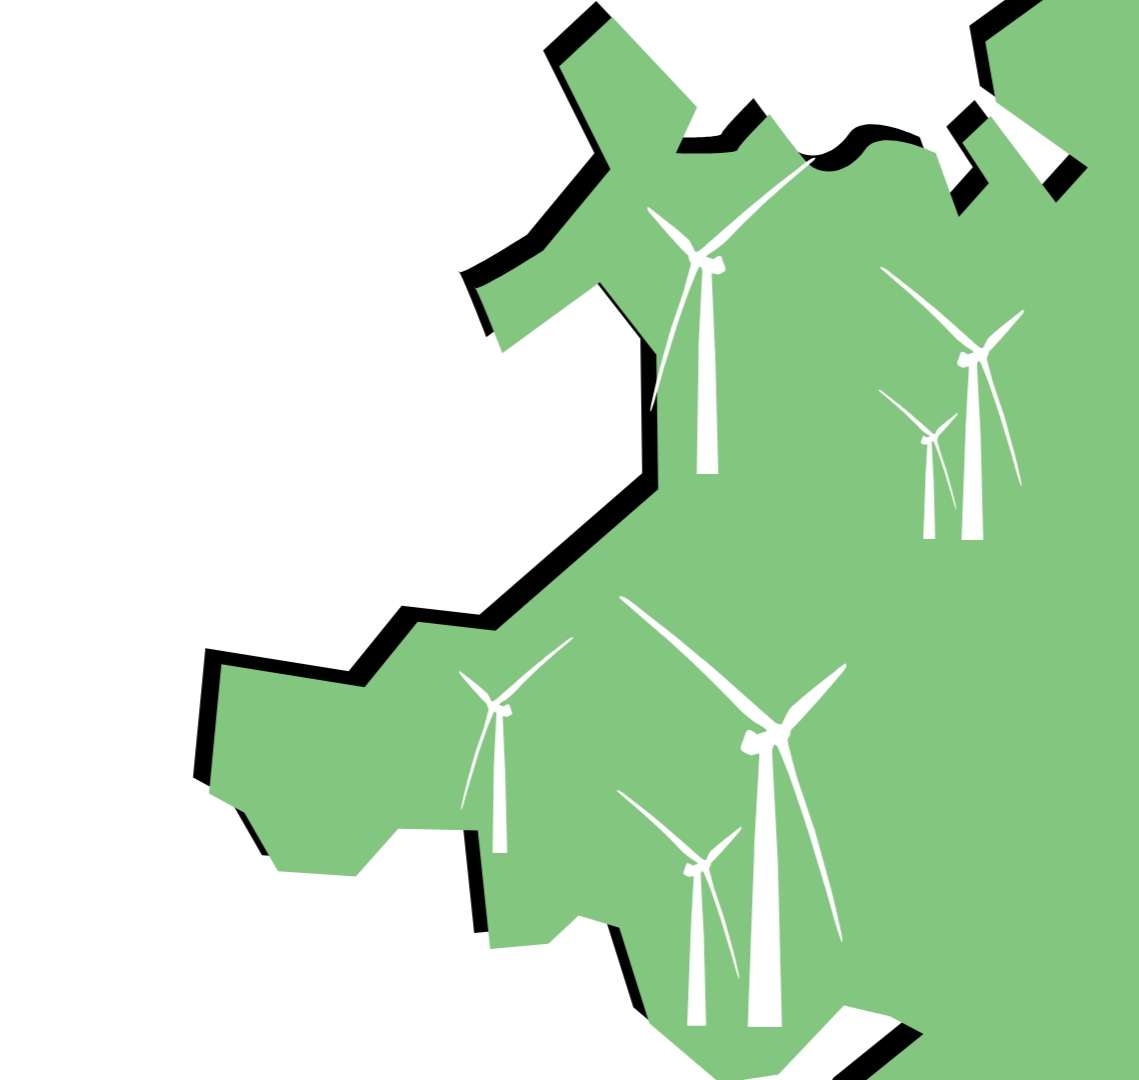 Welsh Lib Dems call on Welsh Gov to ensure local communities benefit from new grid developments